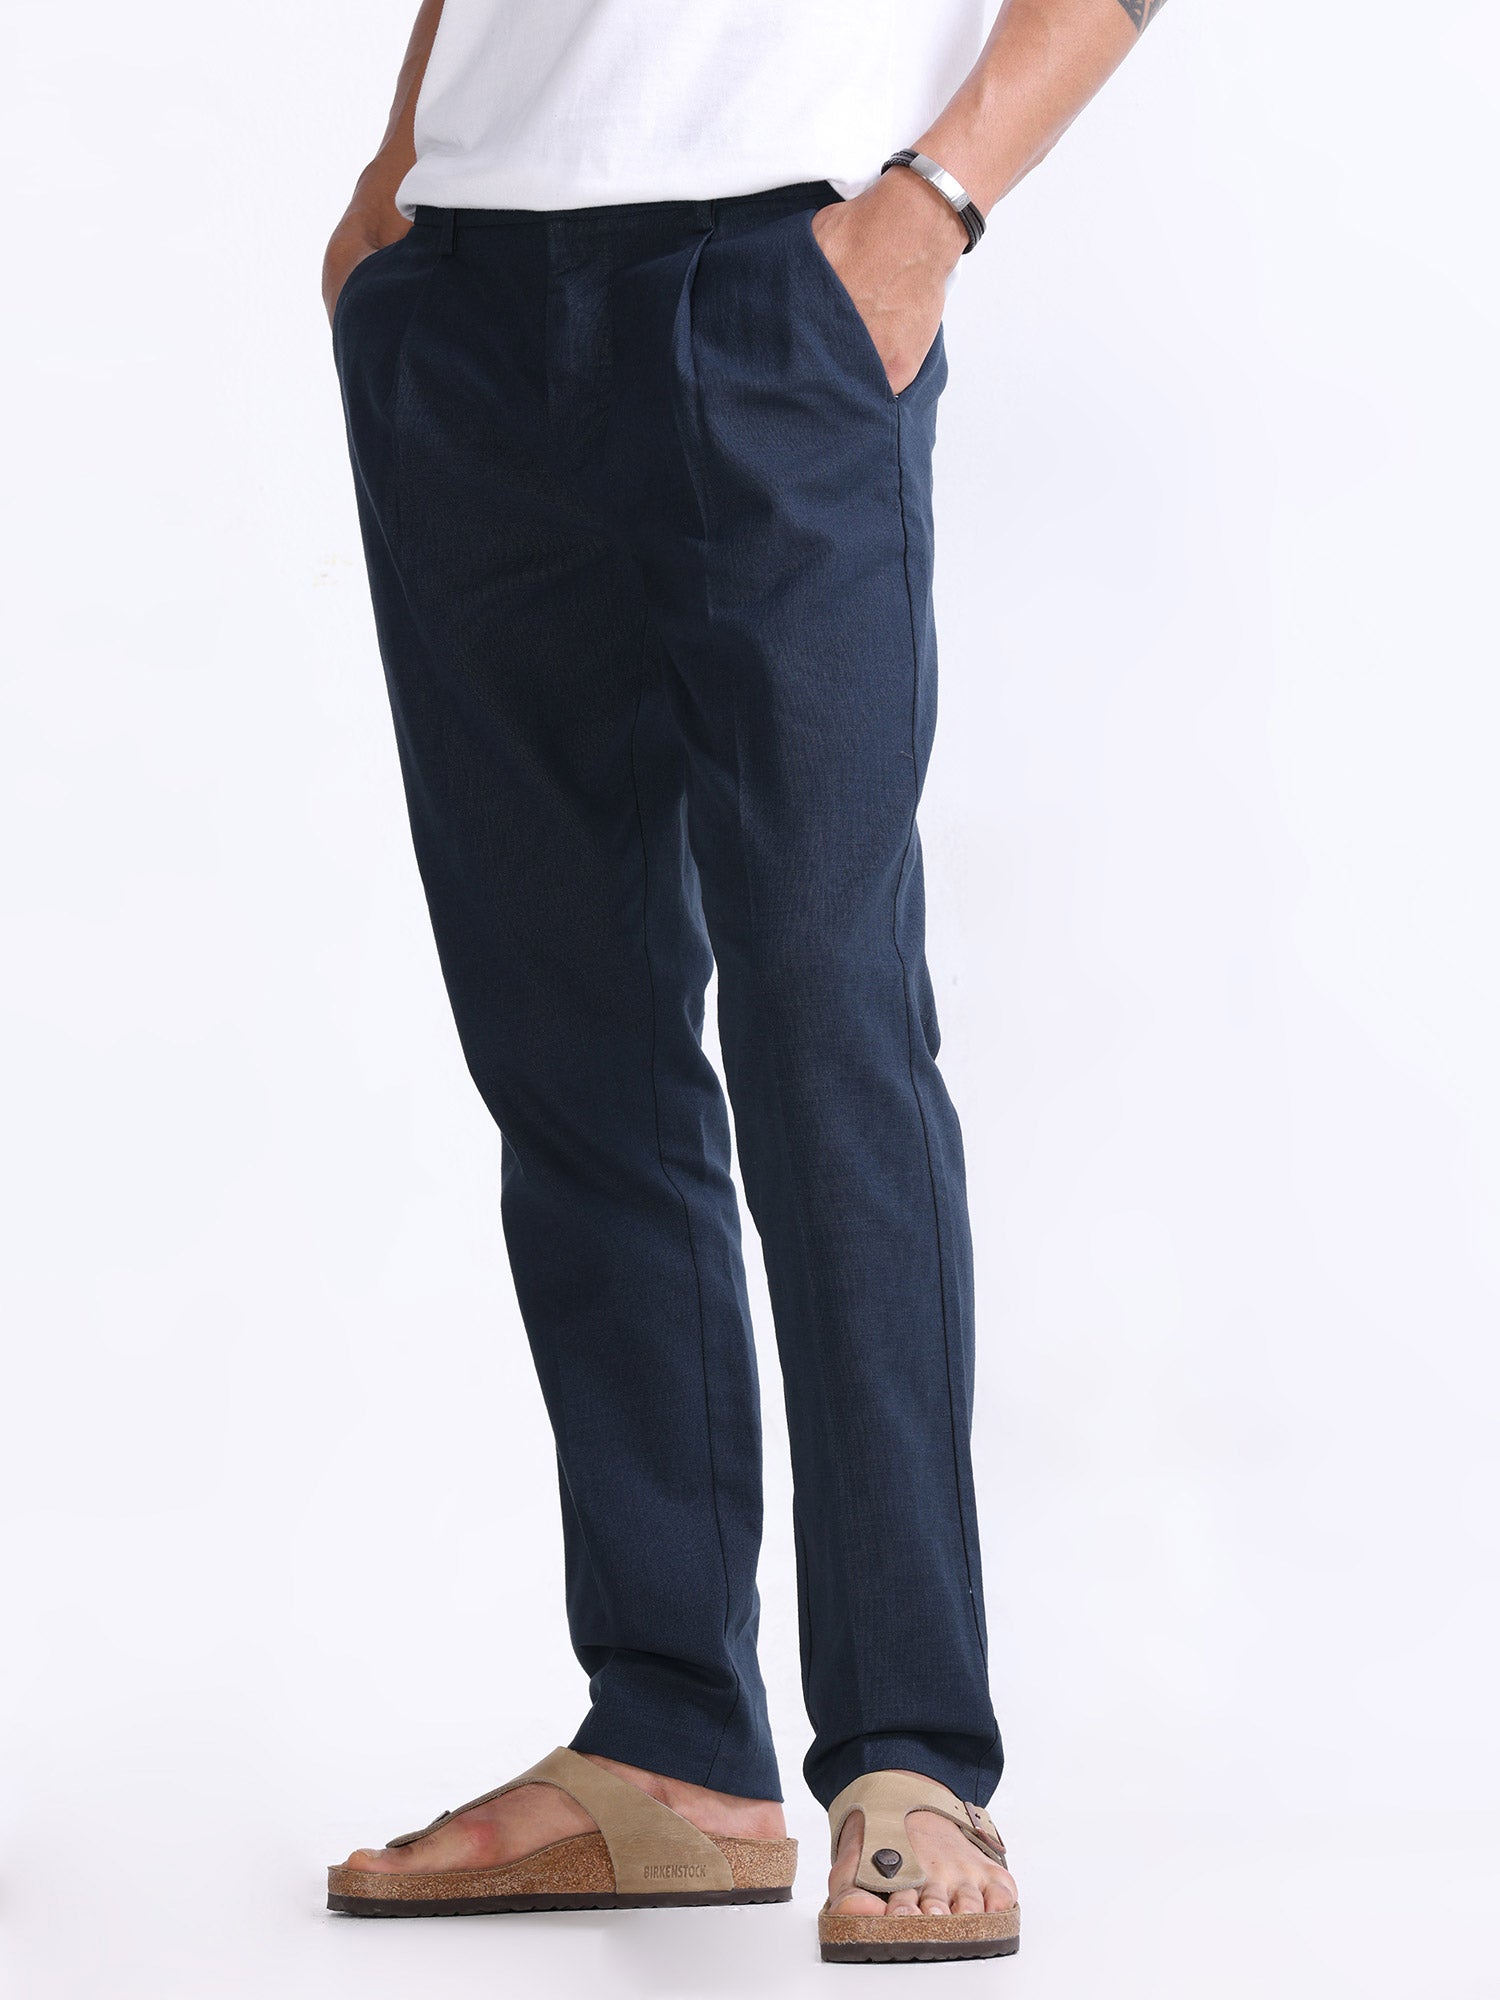 Mens Zegna navy Cotton-Blend Pleated Trousers | Harrods UK